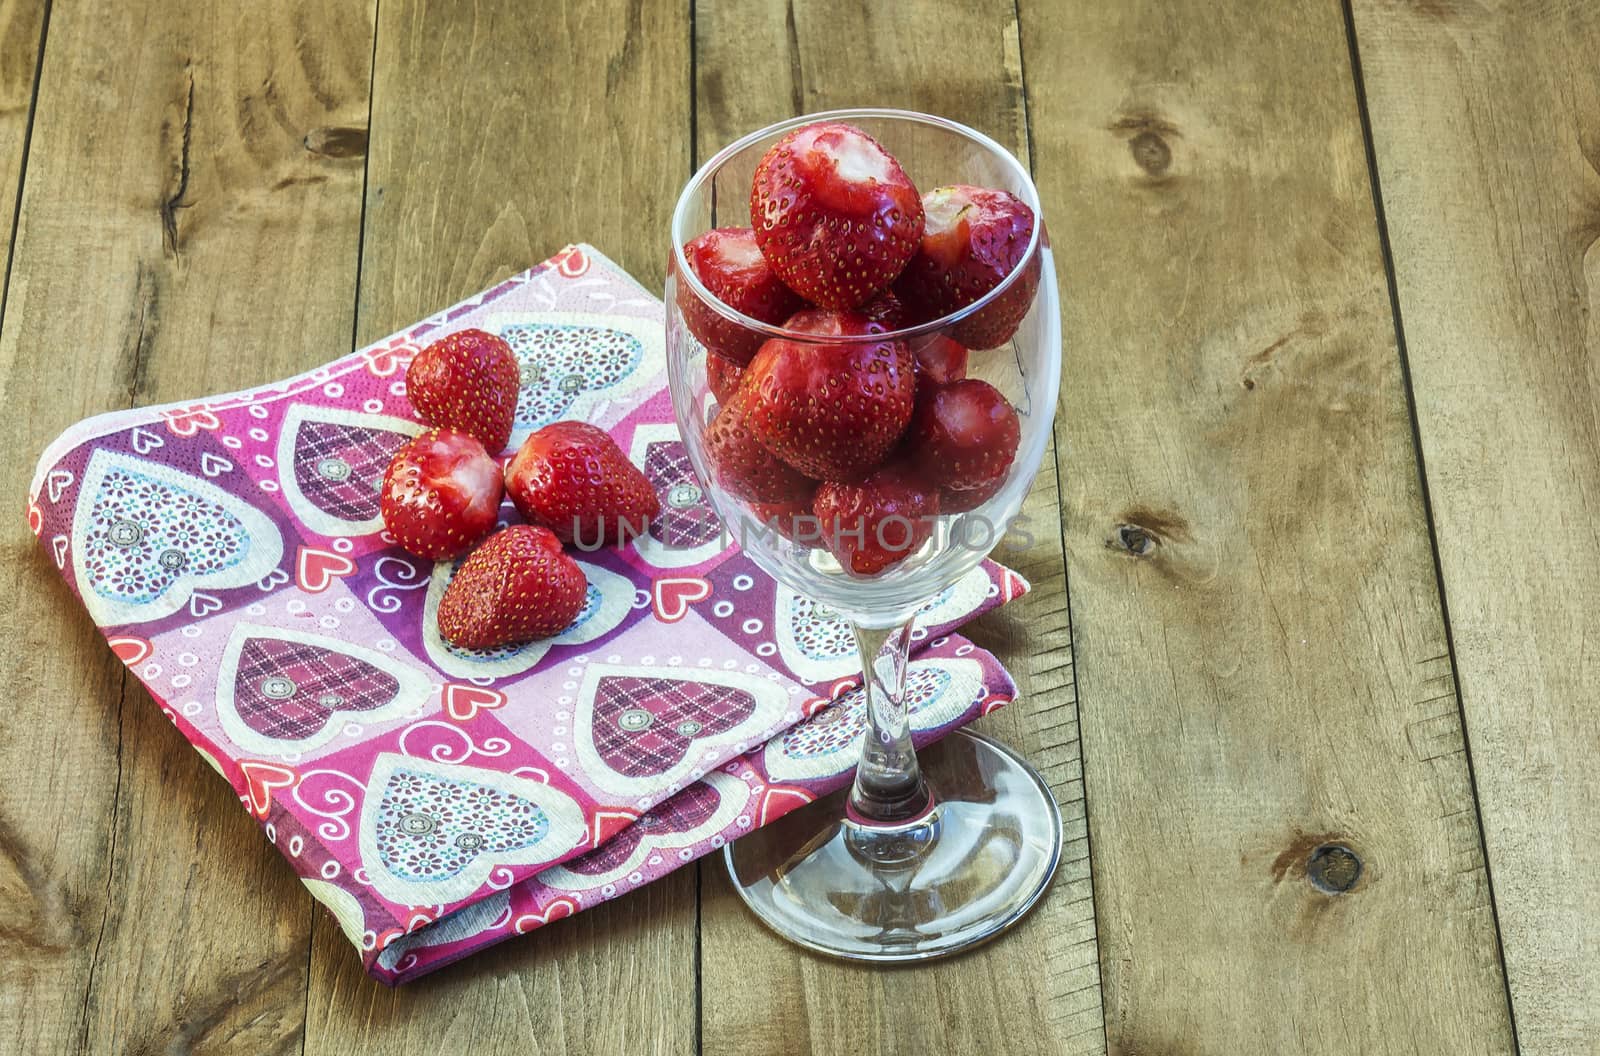 Berry strawberries in a glass fouger on a wooden surface